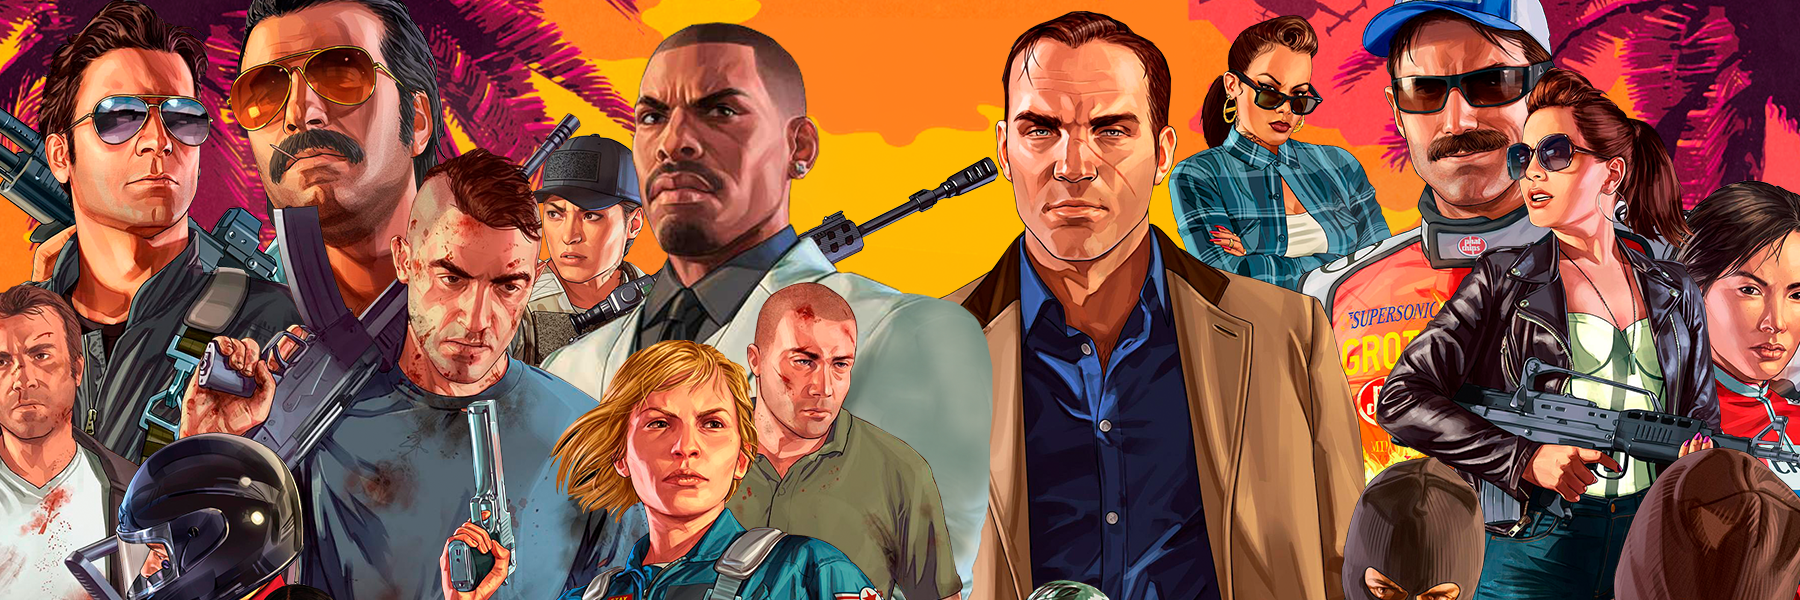 GTA Online cover image